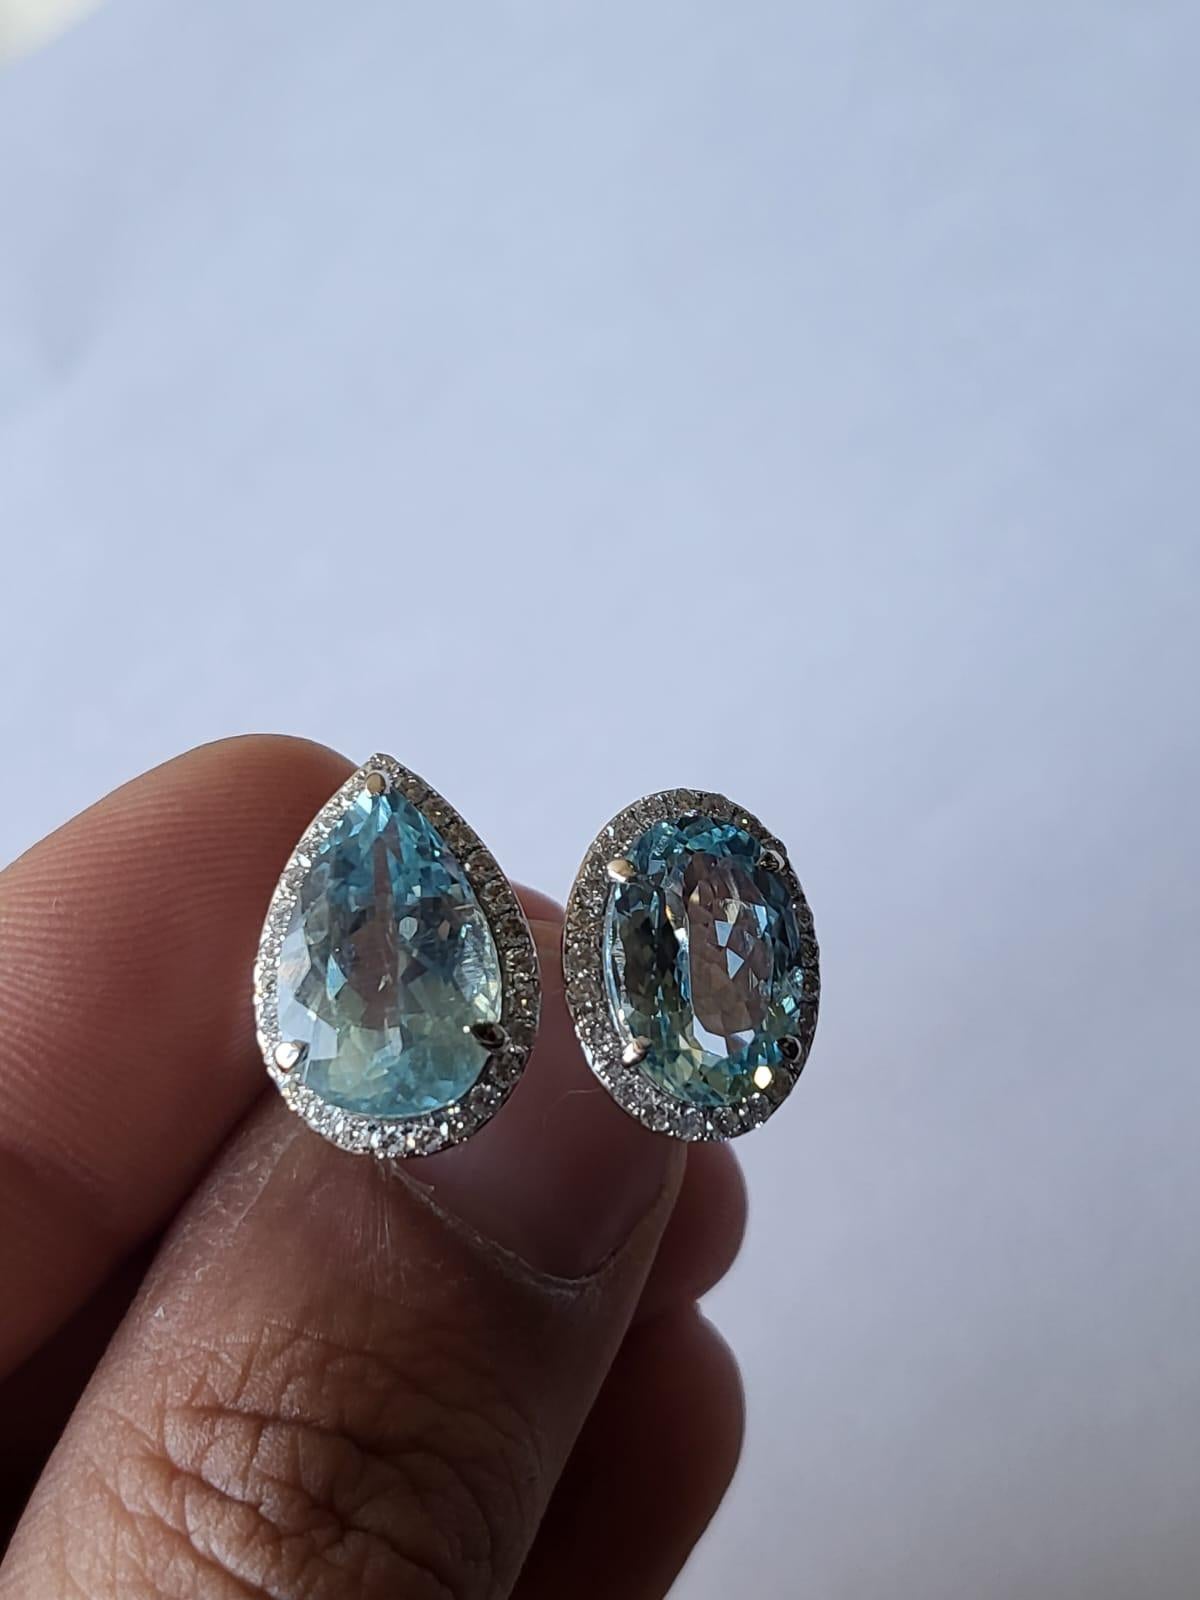 A very gorgeous and one of a kind, Aquamarine Two - Finger / Cocktail Ring set in 18K White Gold & Diamonds. The combined weight of the Aquamarine oval & pear is 7.96 carats. The weight of the Diamonds is 0.61 carats. Net Gold weight is 7.28 grams.